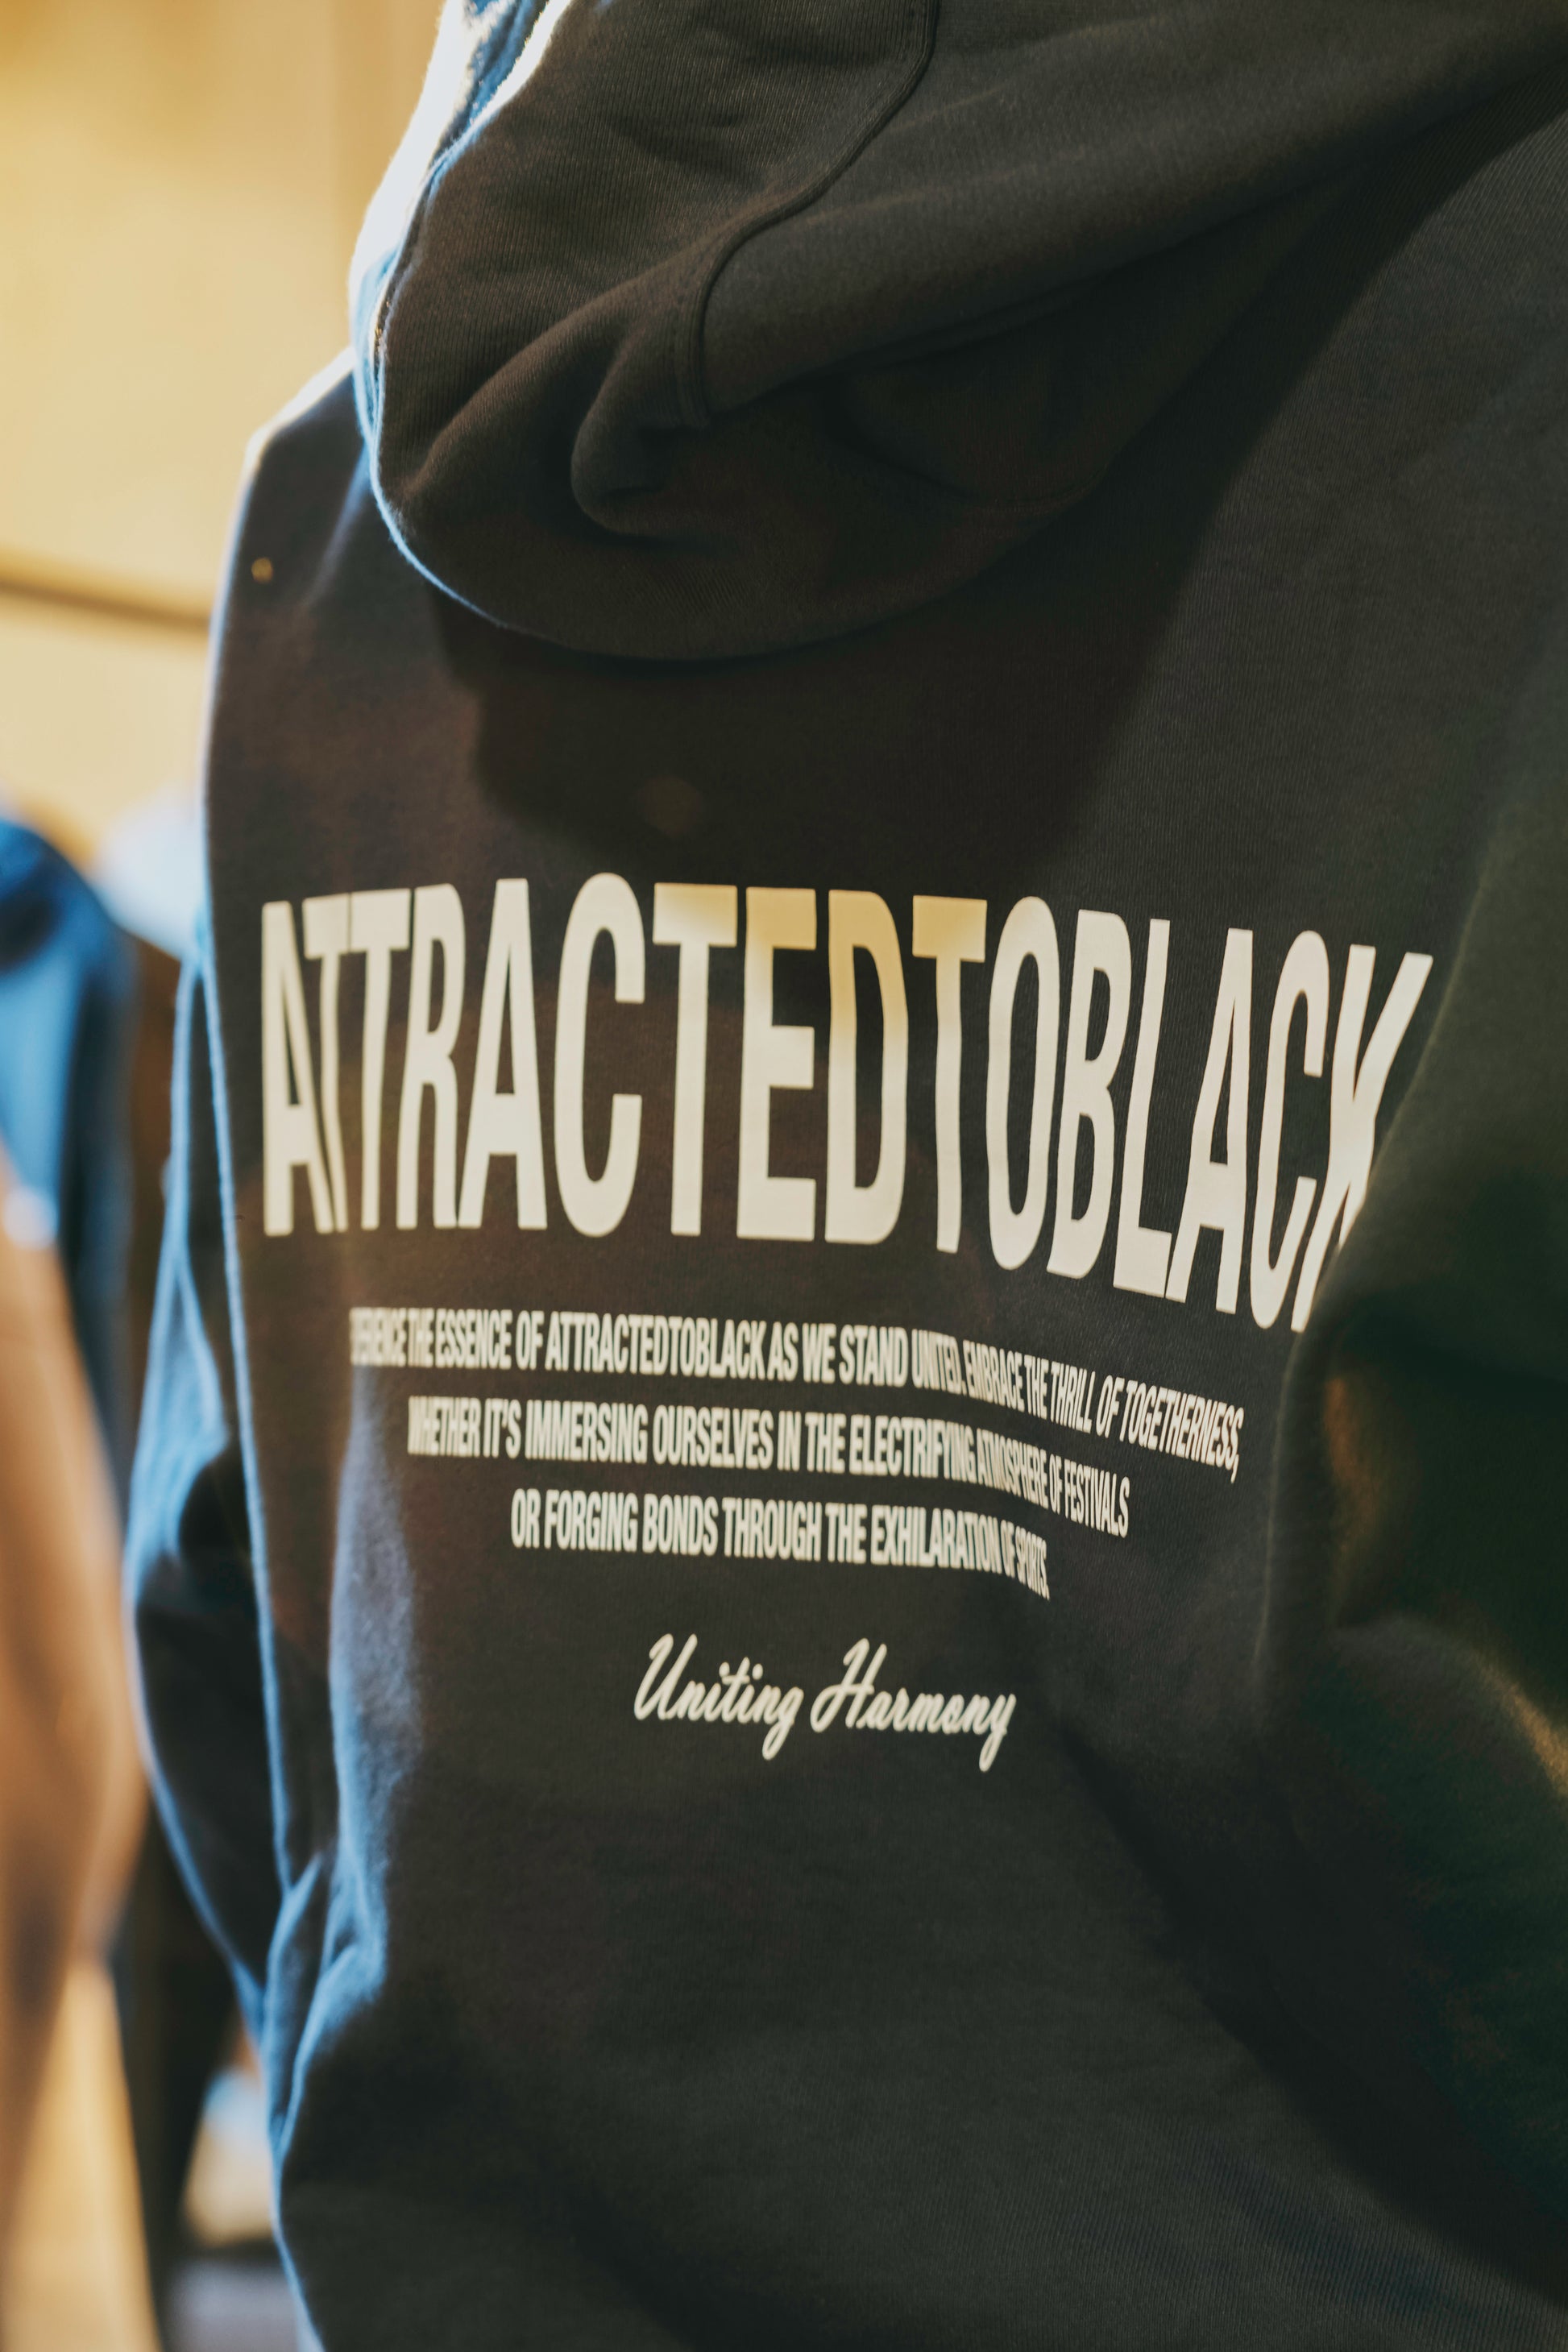 The Unified Accord Hoodie - Attractedtoblack